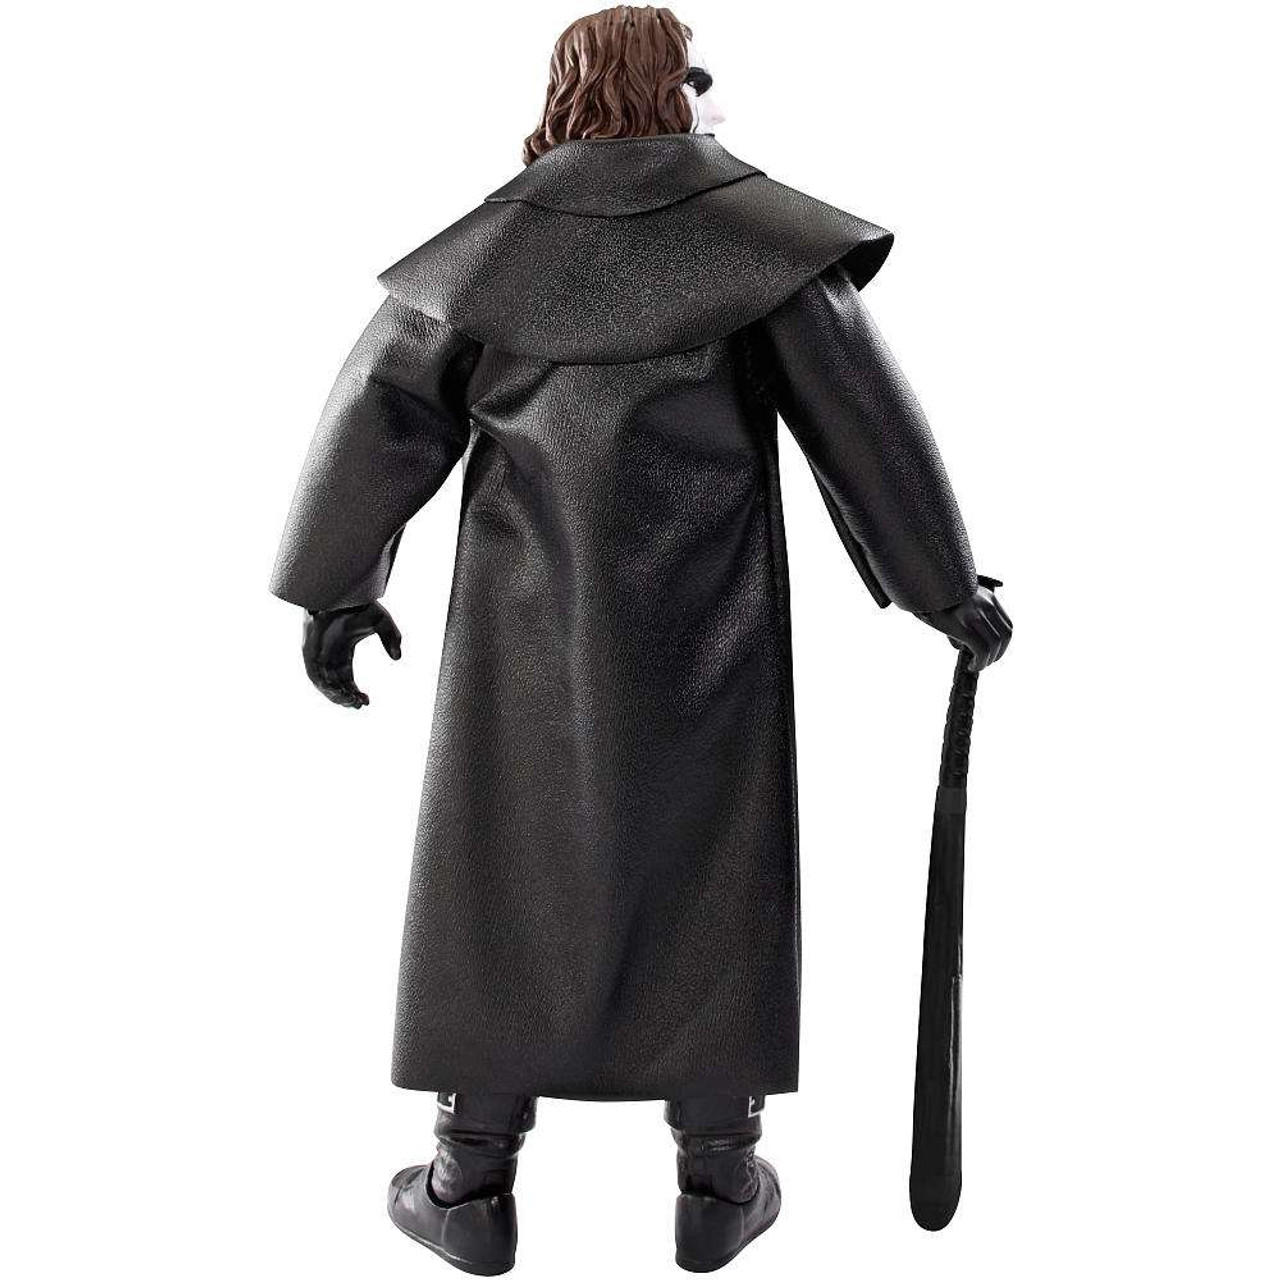 WWE Wrestling Defining Moments Sting Action Figure Black Trench Coat ...